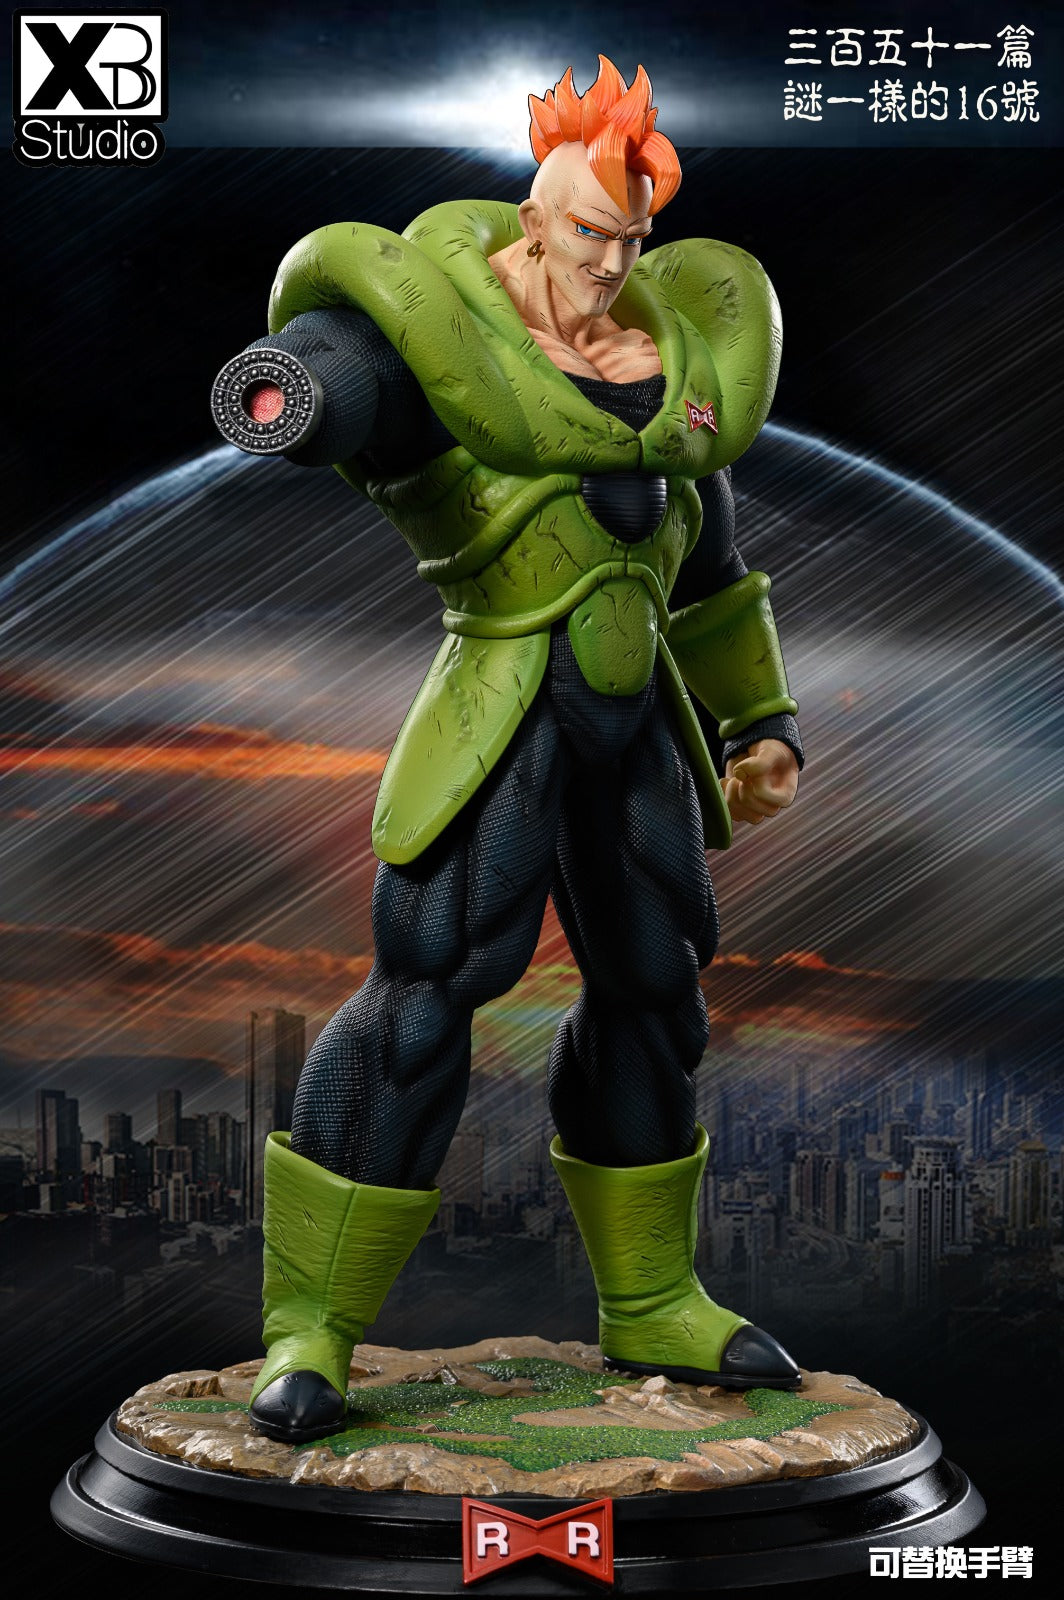 XBD - Android 16 StatueCorp